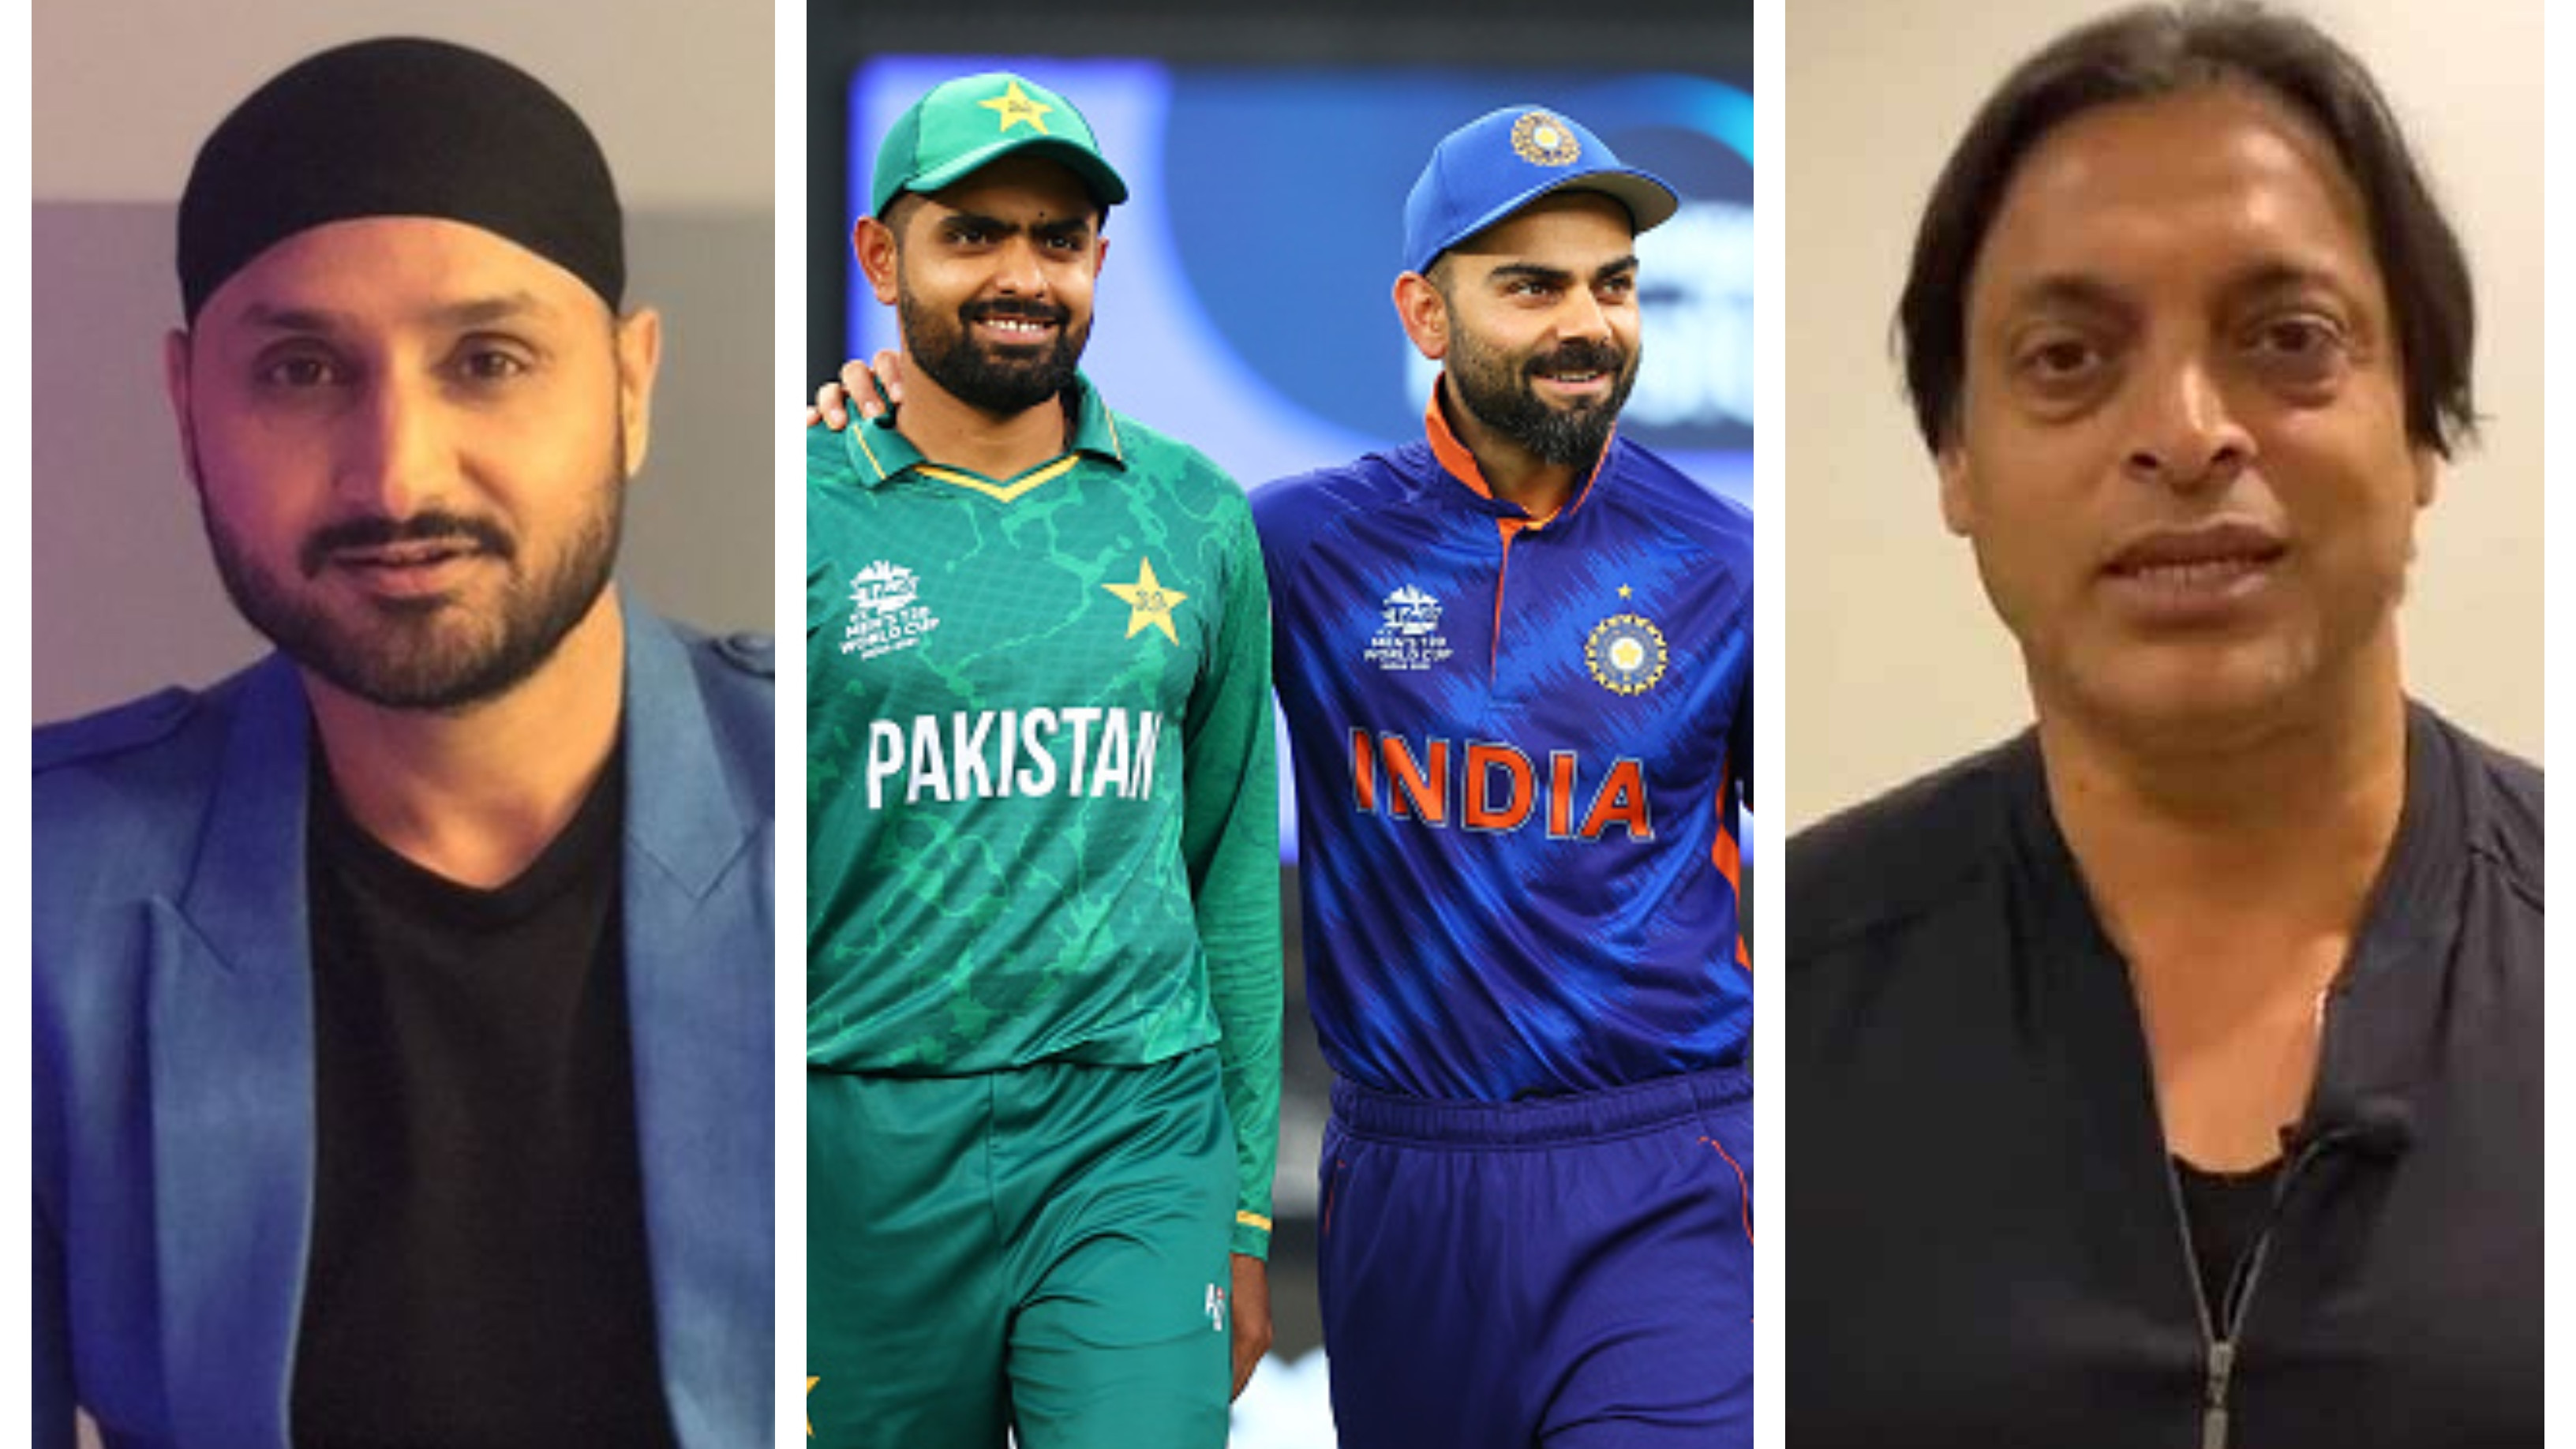 T20 World Cup 2021: “Want India to be in finals”, Shoaib Akhtar tells Harbhajan Singh amid Twitter banter